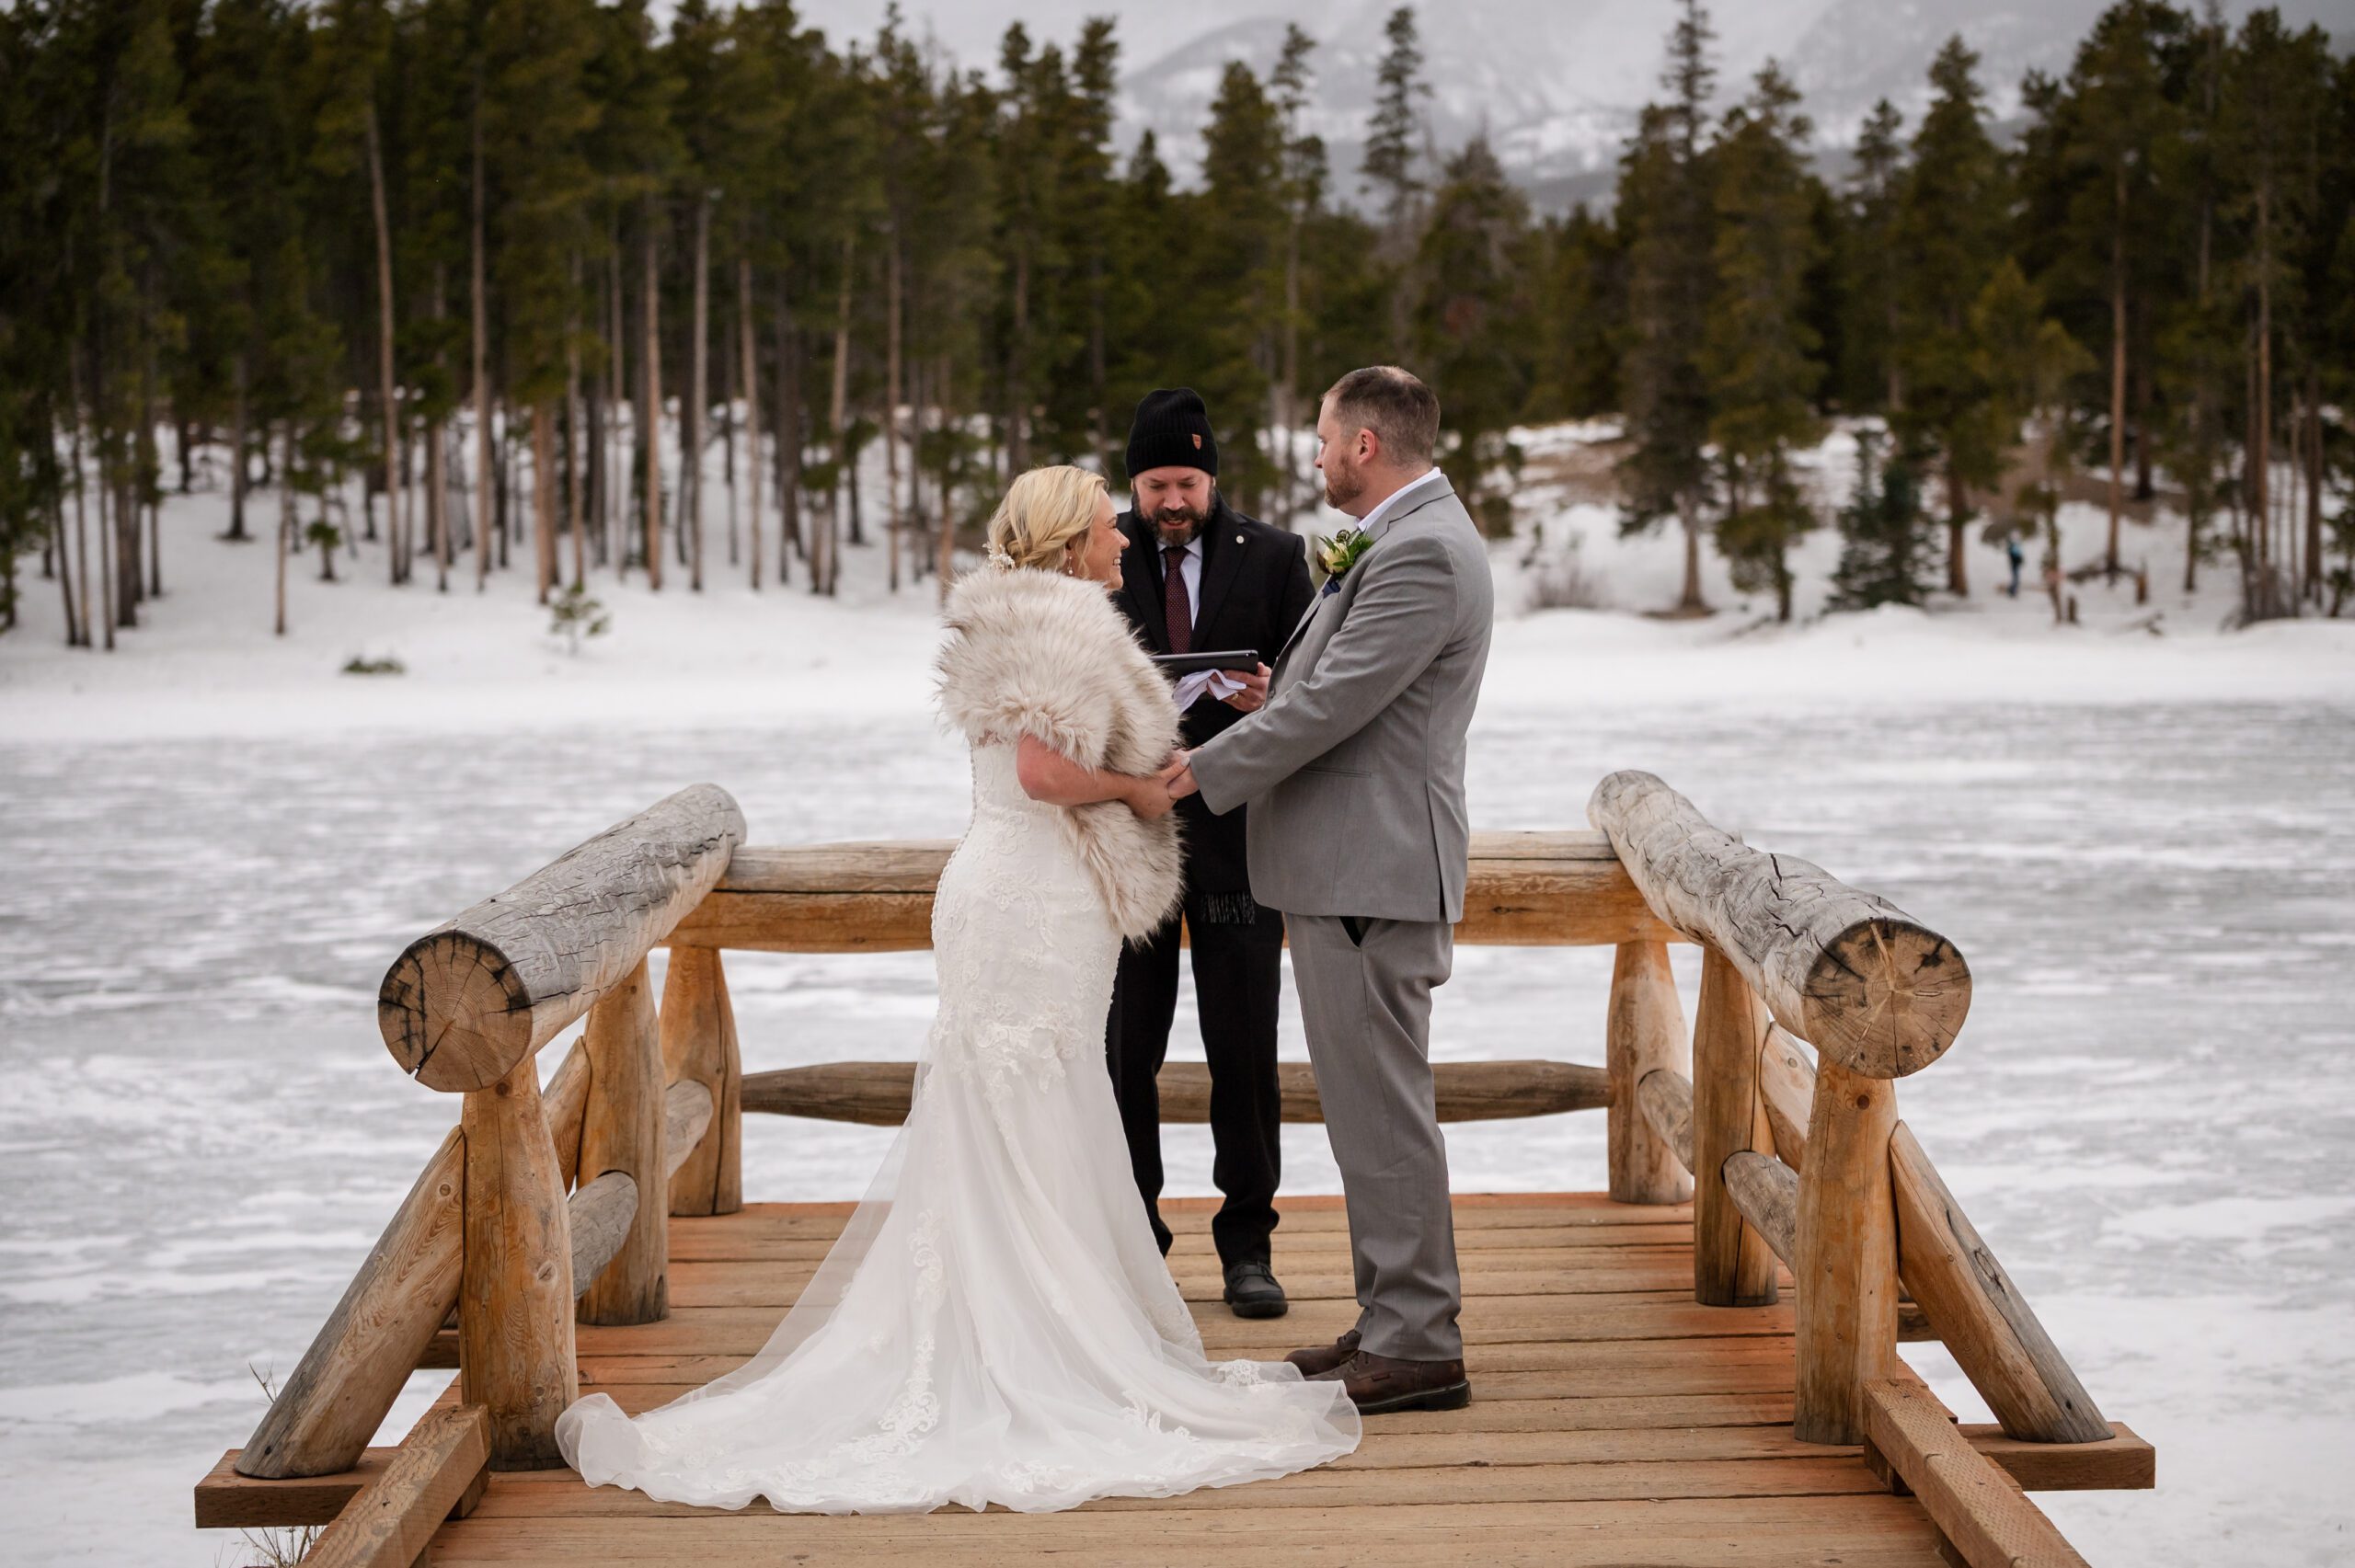 the bride smiles as she hodls her grooms hands during their Winter Elopement ceremony at Sprague Lake.  